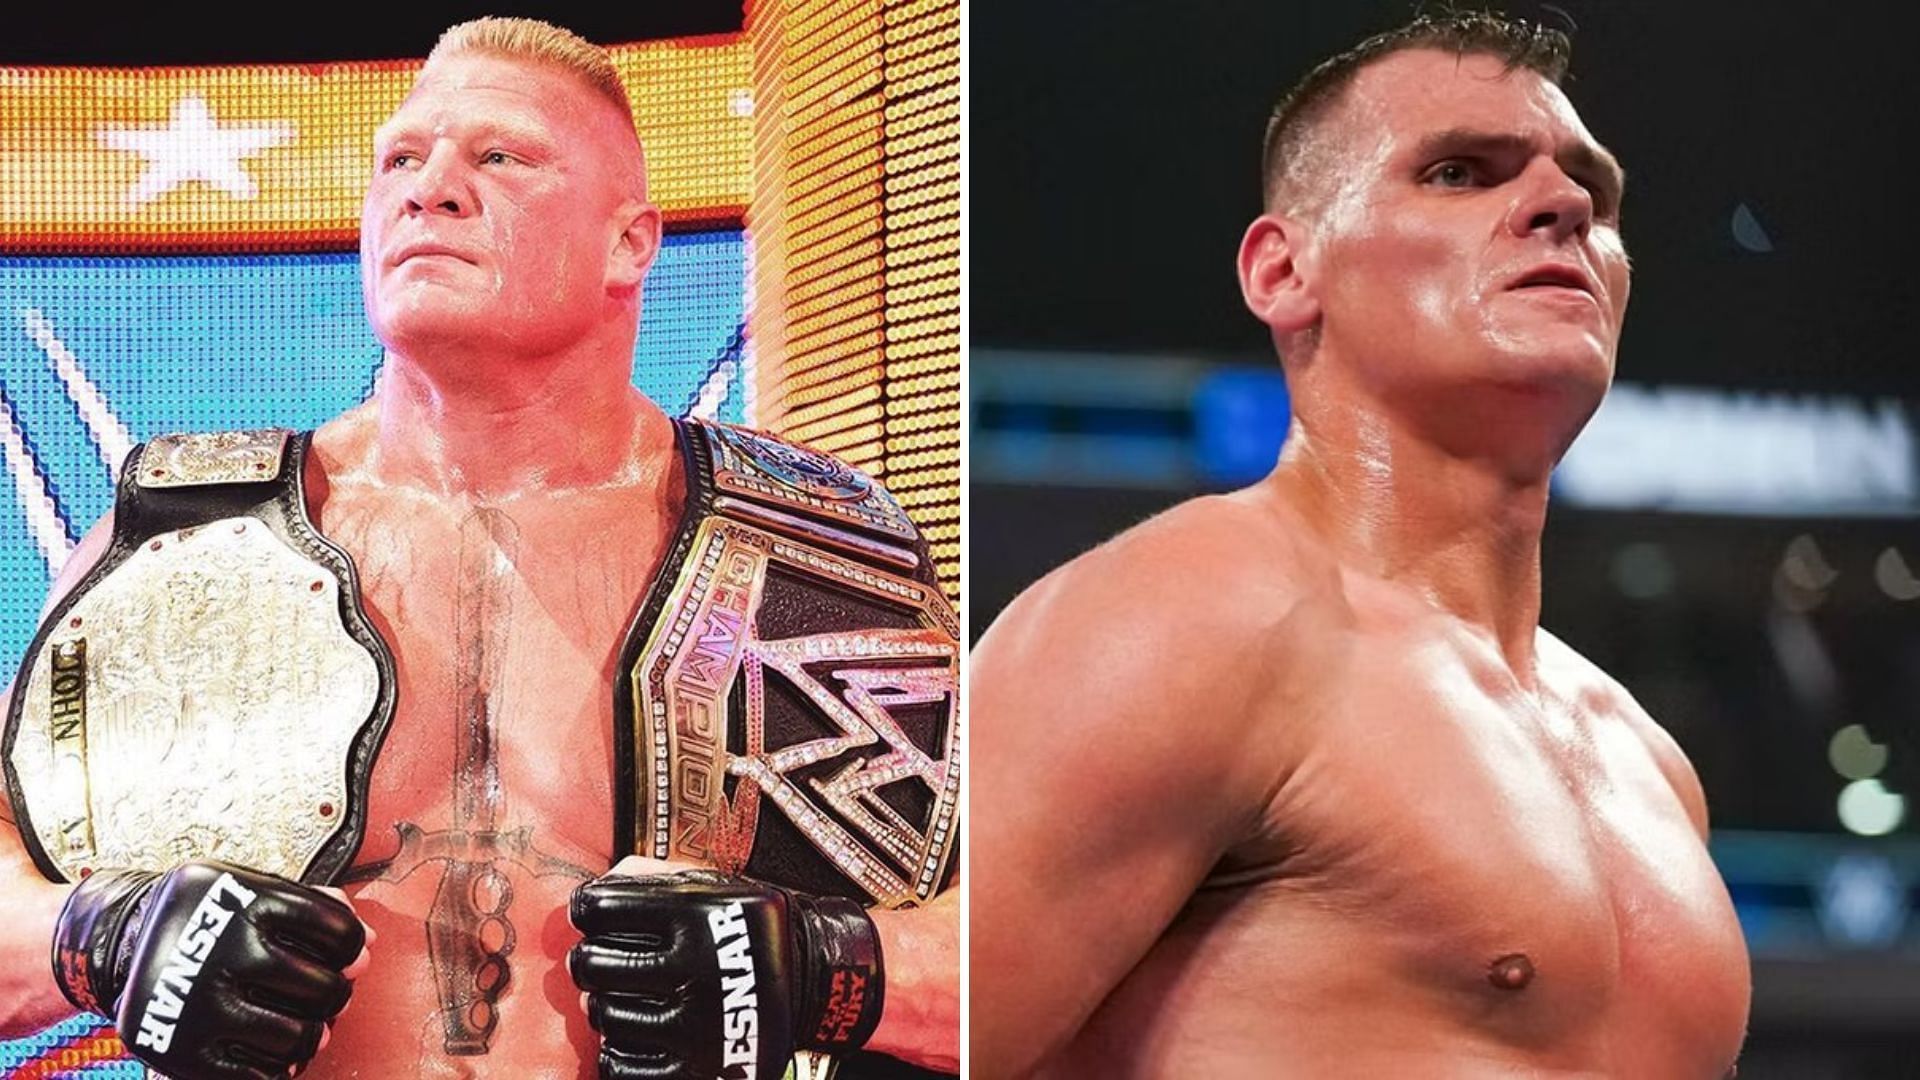 Time is running out for a legit dream match between veteran Brock Lesnar and Gunther, as the former